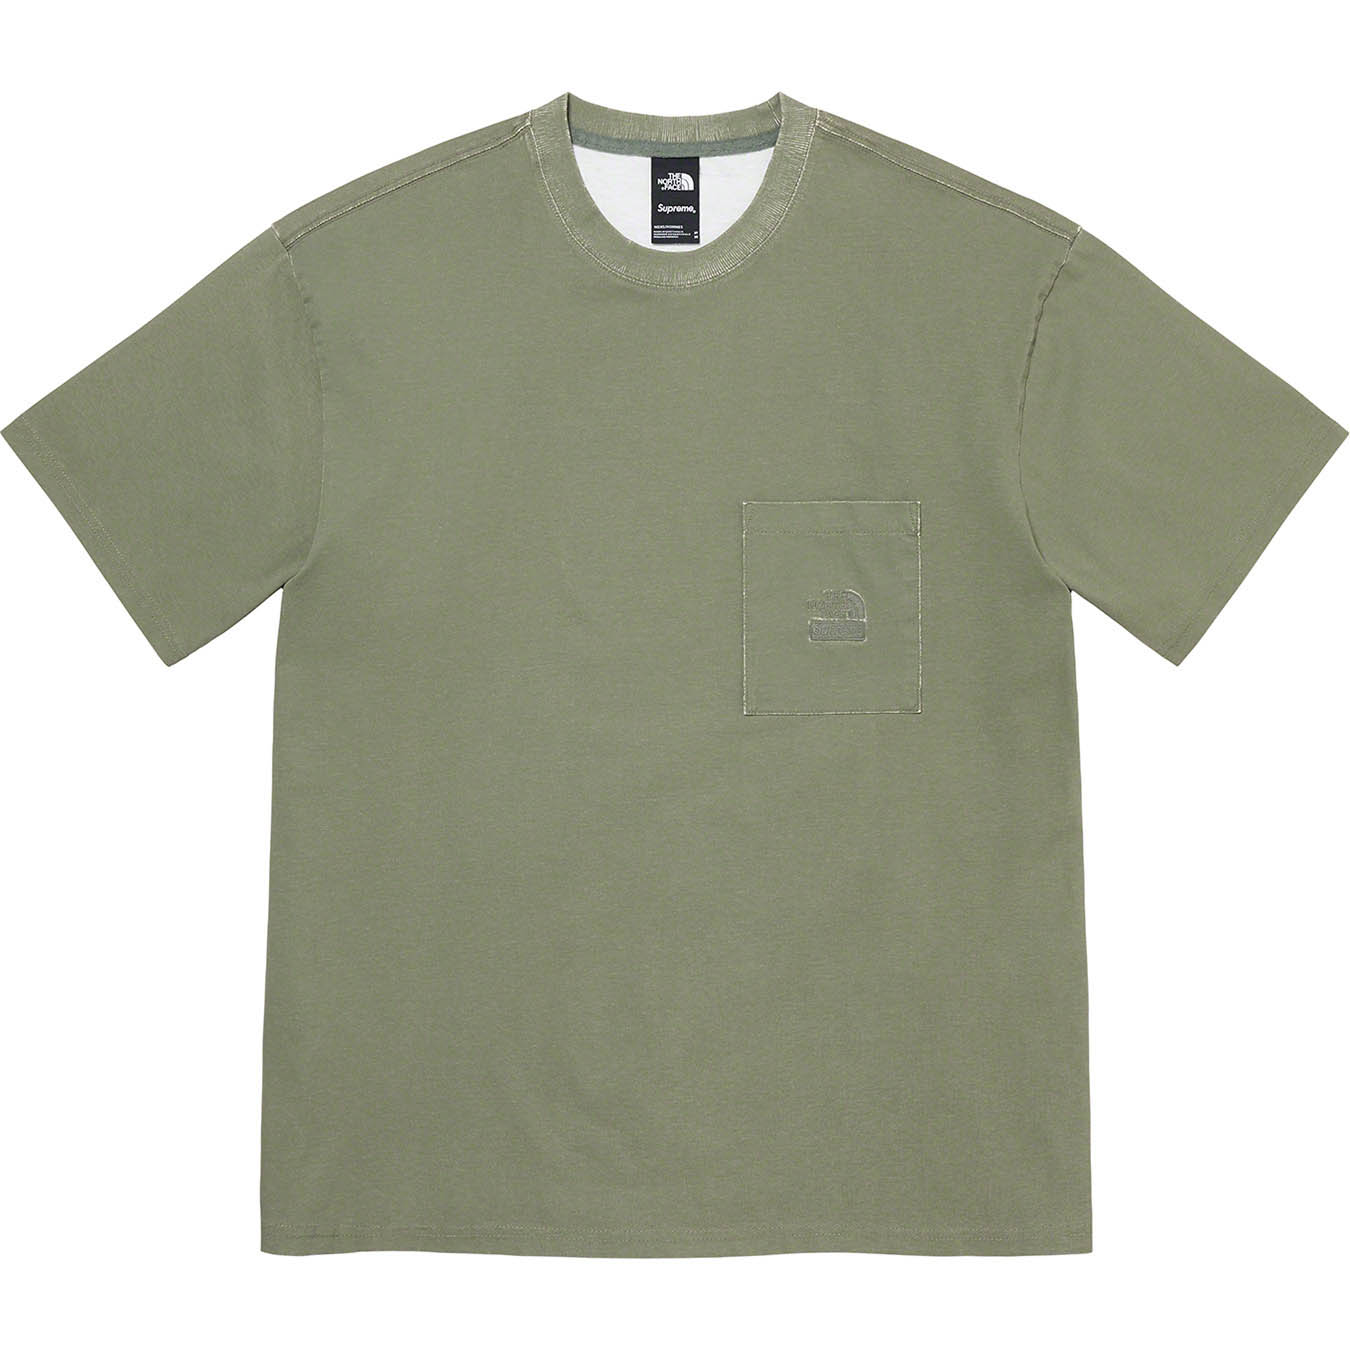 Supreme®/The North Face® Pigment Printed Pocket Tee | Supreme 21ss